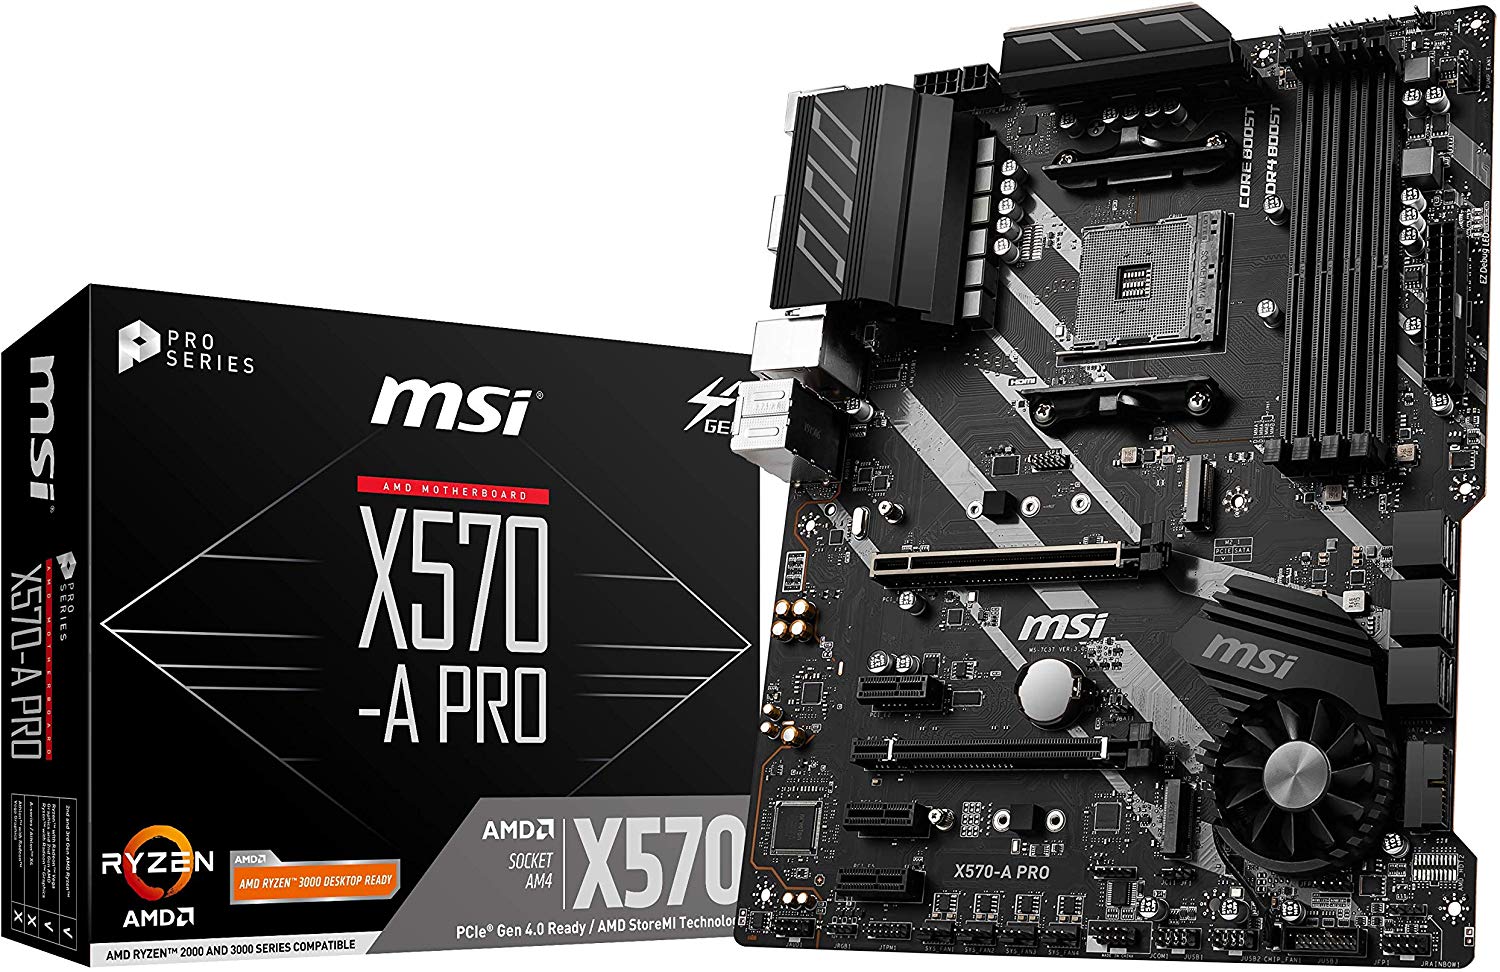 msi-x570-a-pro-motherboard-cropped.jpg